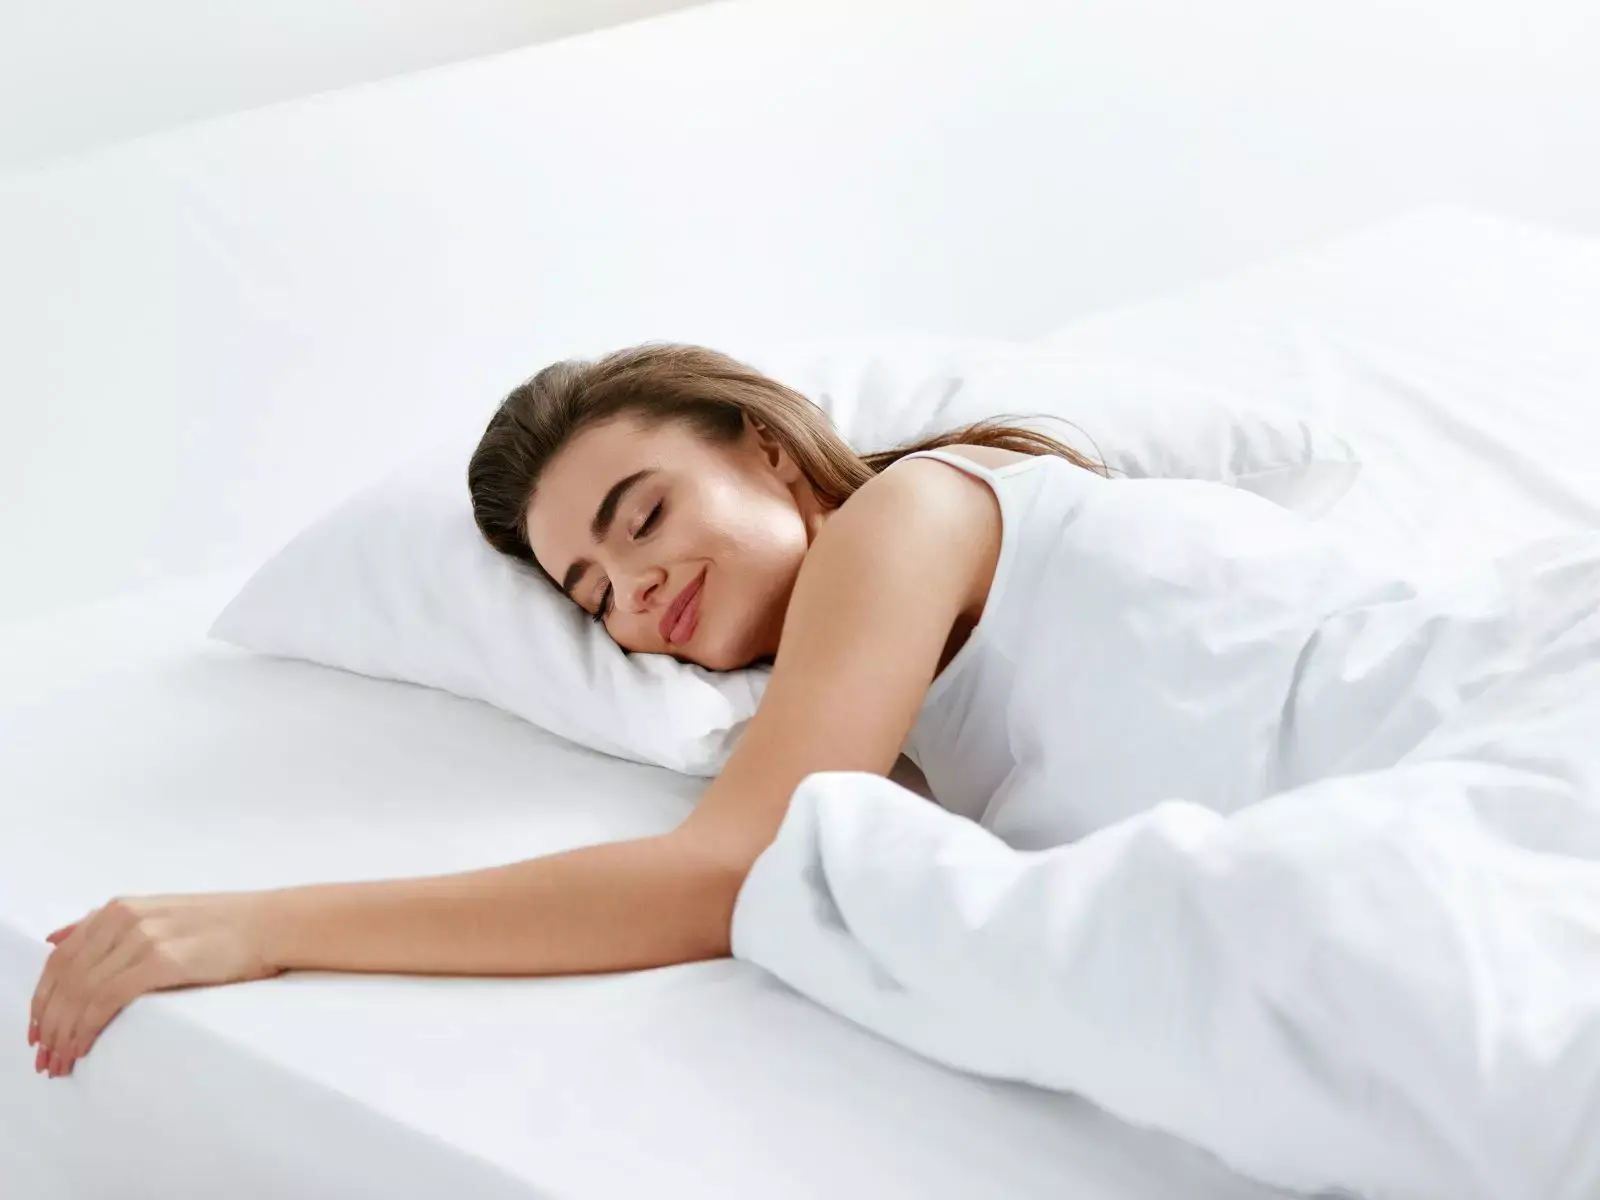 What You Need to Know About Sleeping on Your Side